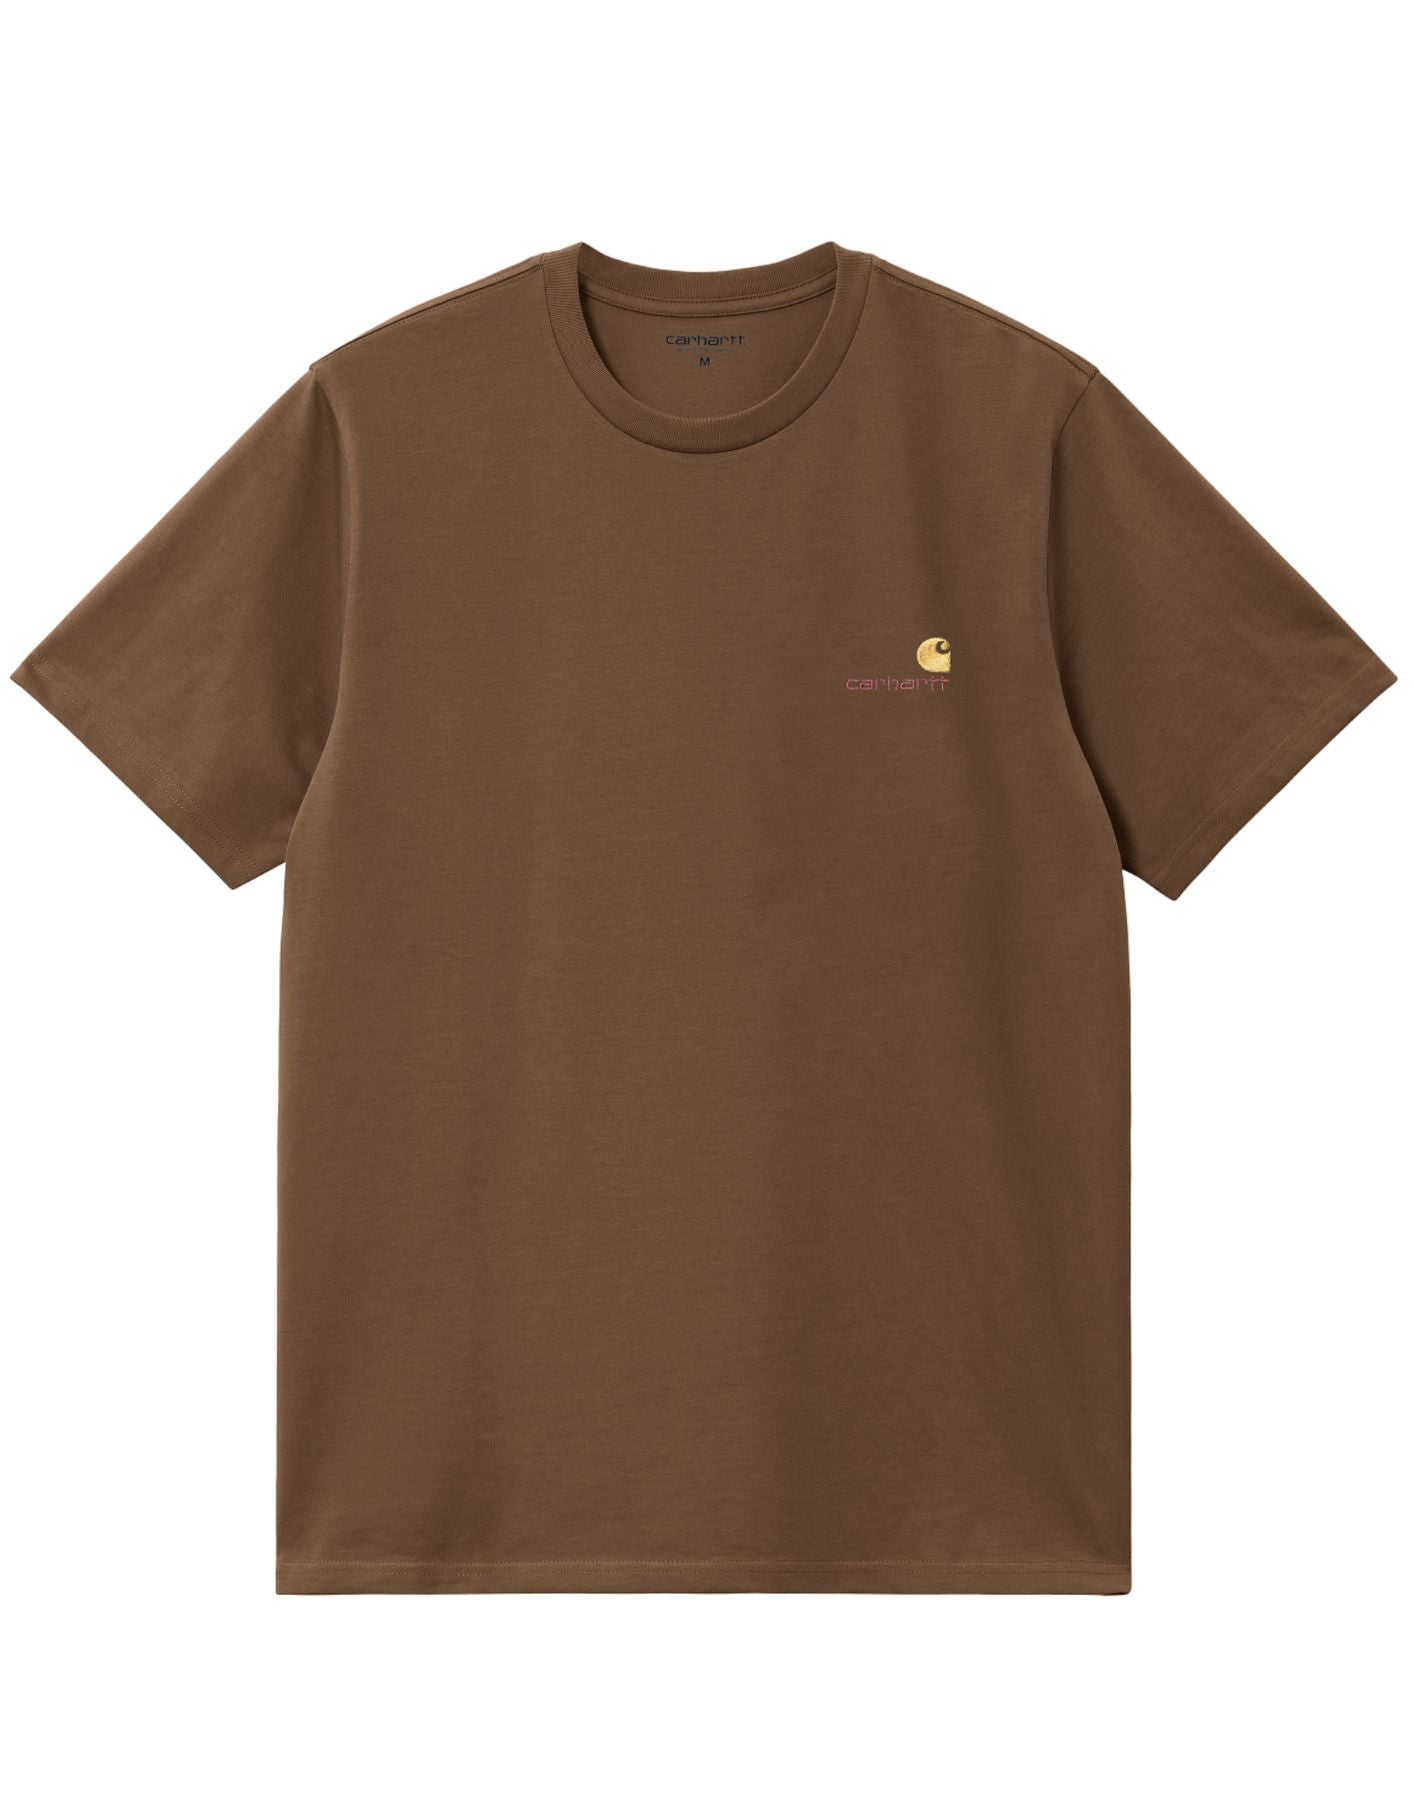 T-shirt pour l'homme I029956 Lumber CARHARTT WIP